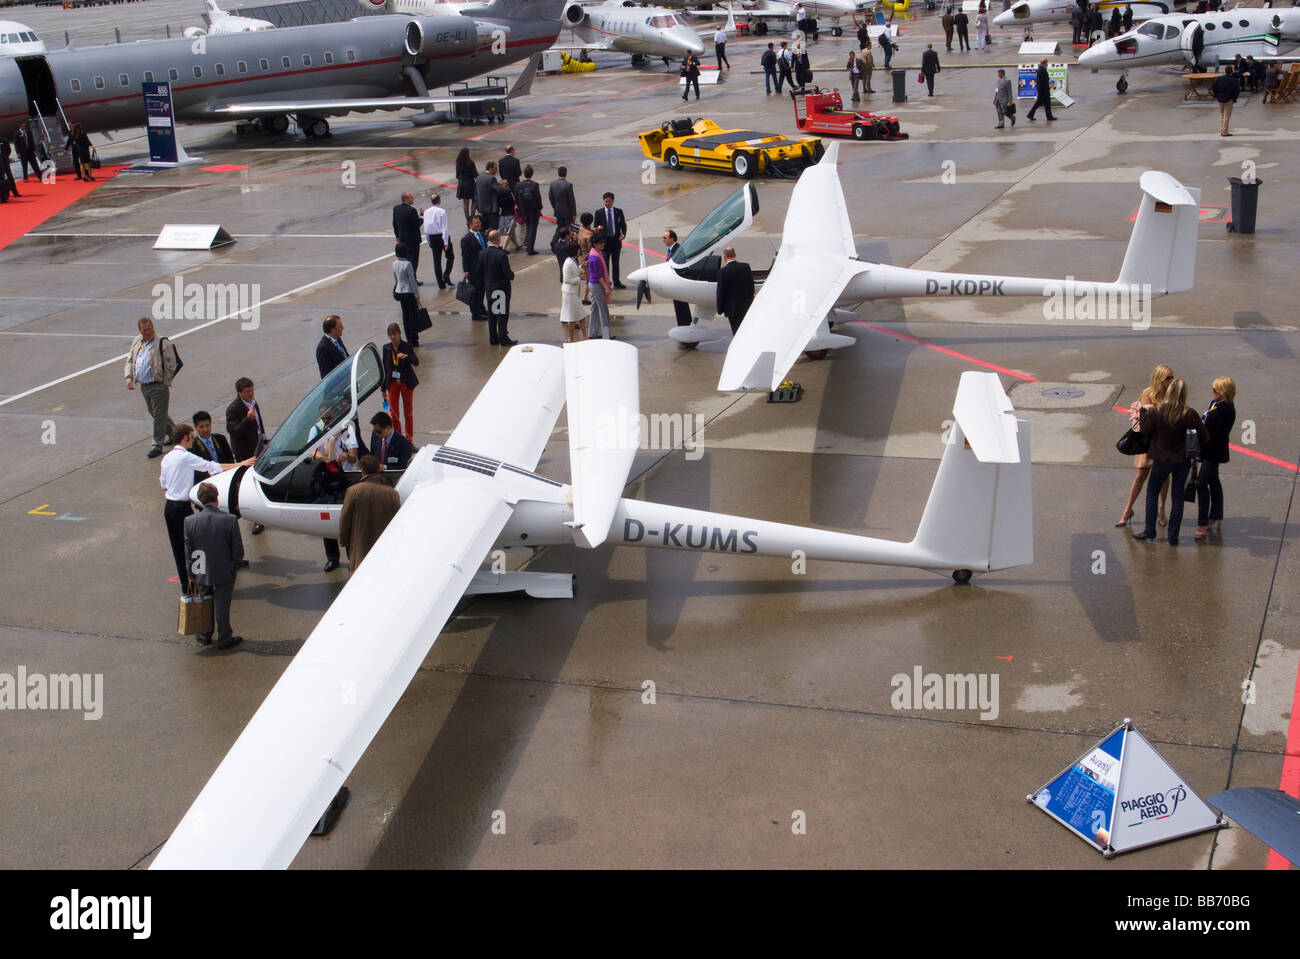 Two Motorised Gliders and Executive Jets at EBACE Trade Show Geneva Airport Switzerland Geneve Suisse Stock Photo